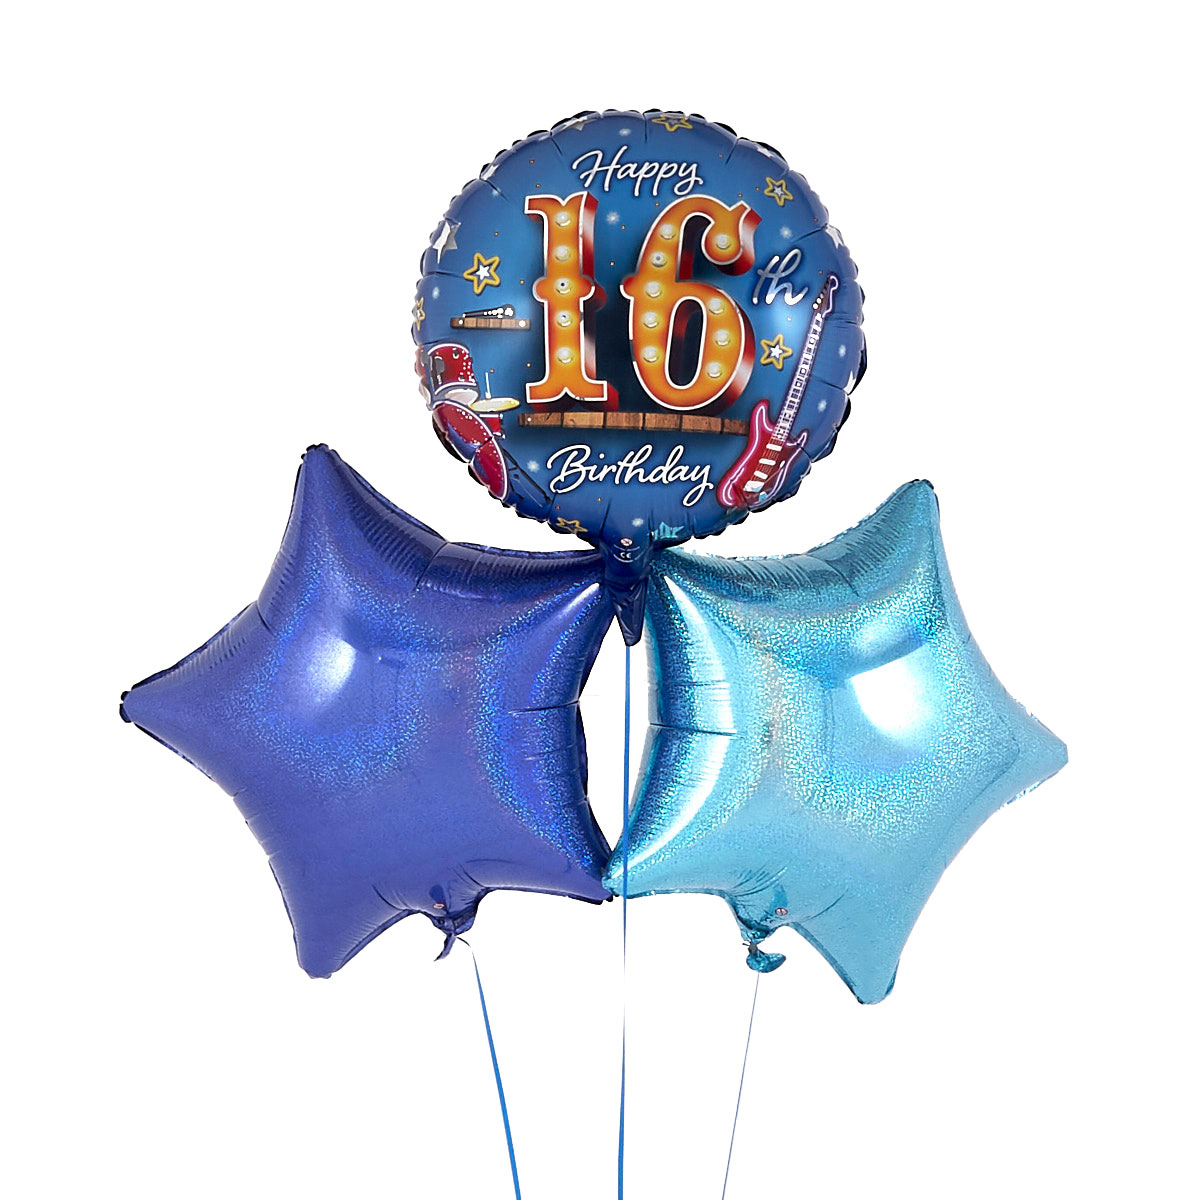 16th Birthday Rock Star Blue Balloon Bouquet - DELIVERED INFLATED! 